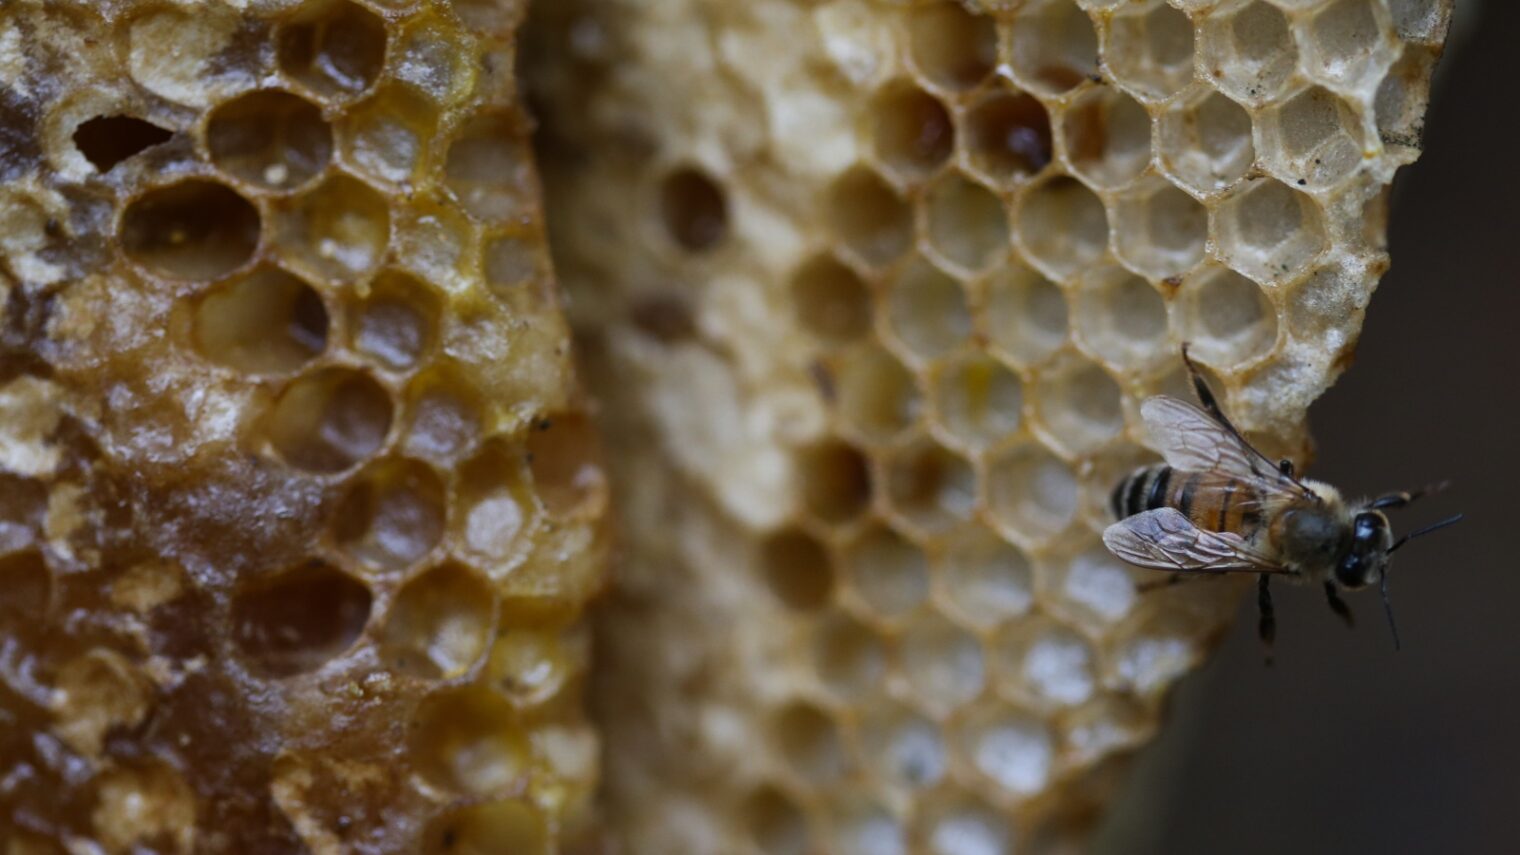 A beehive in Jerusalem. Photo by Nati Shohat/FLASH90